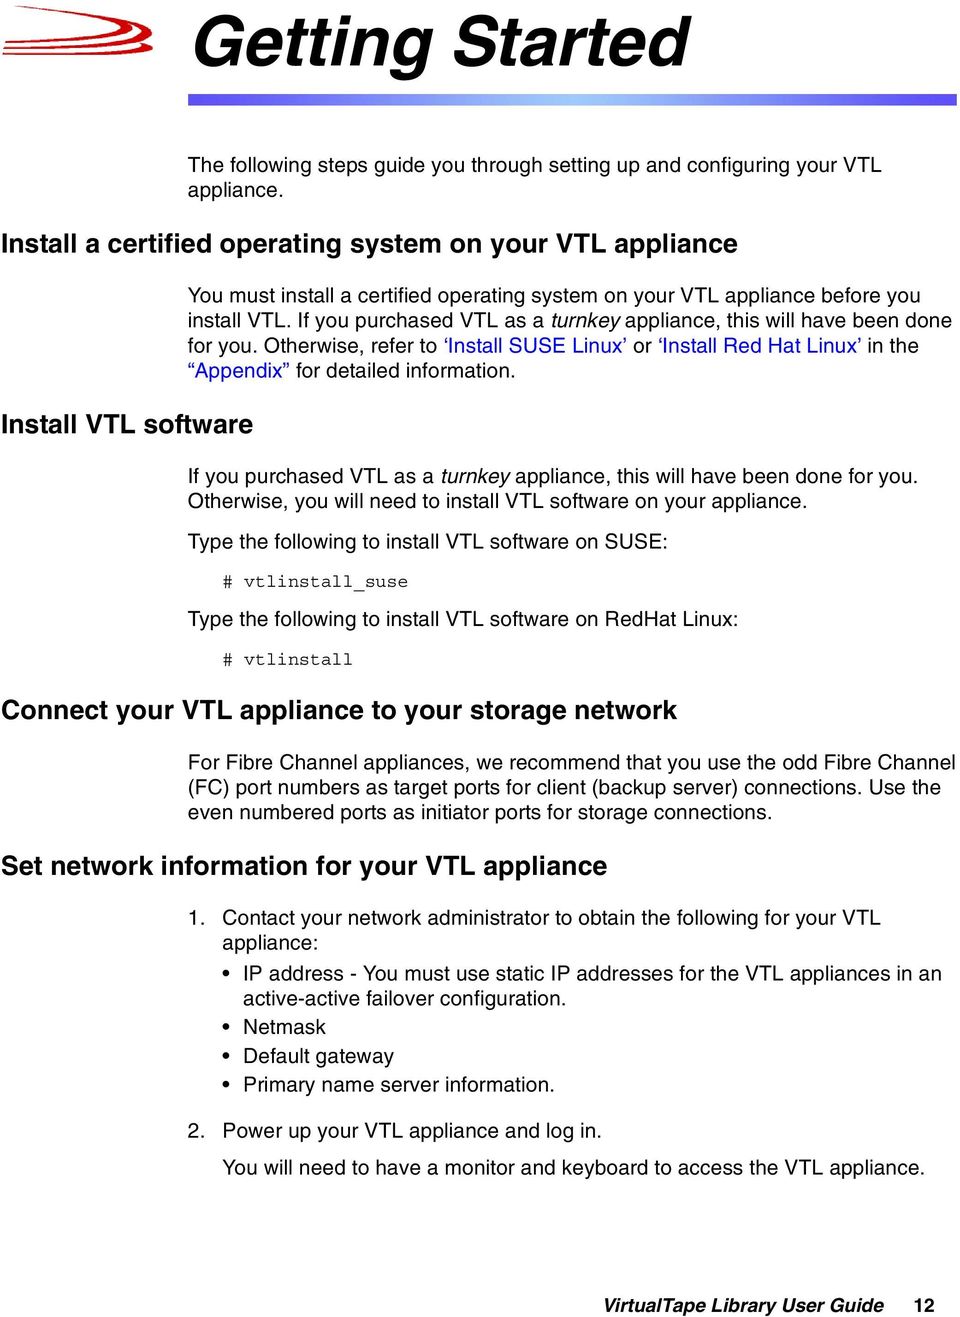 If you purchased VTL as a turnkey appliance, this will have been done for you. Otherwise, refer to Install SUSE Linux or Install Red Hat Linux in the Appendix for detailed information.